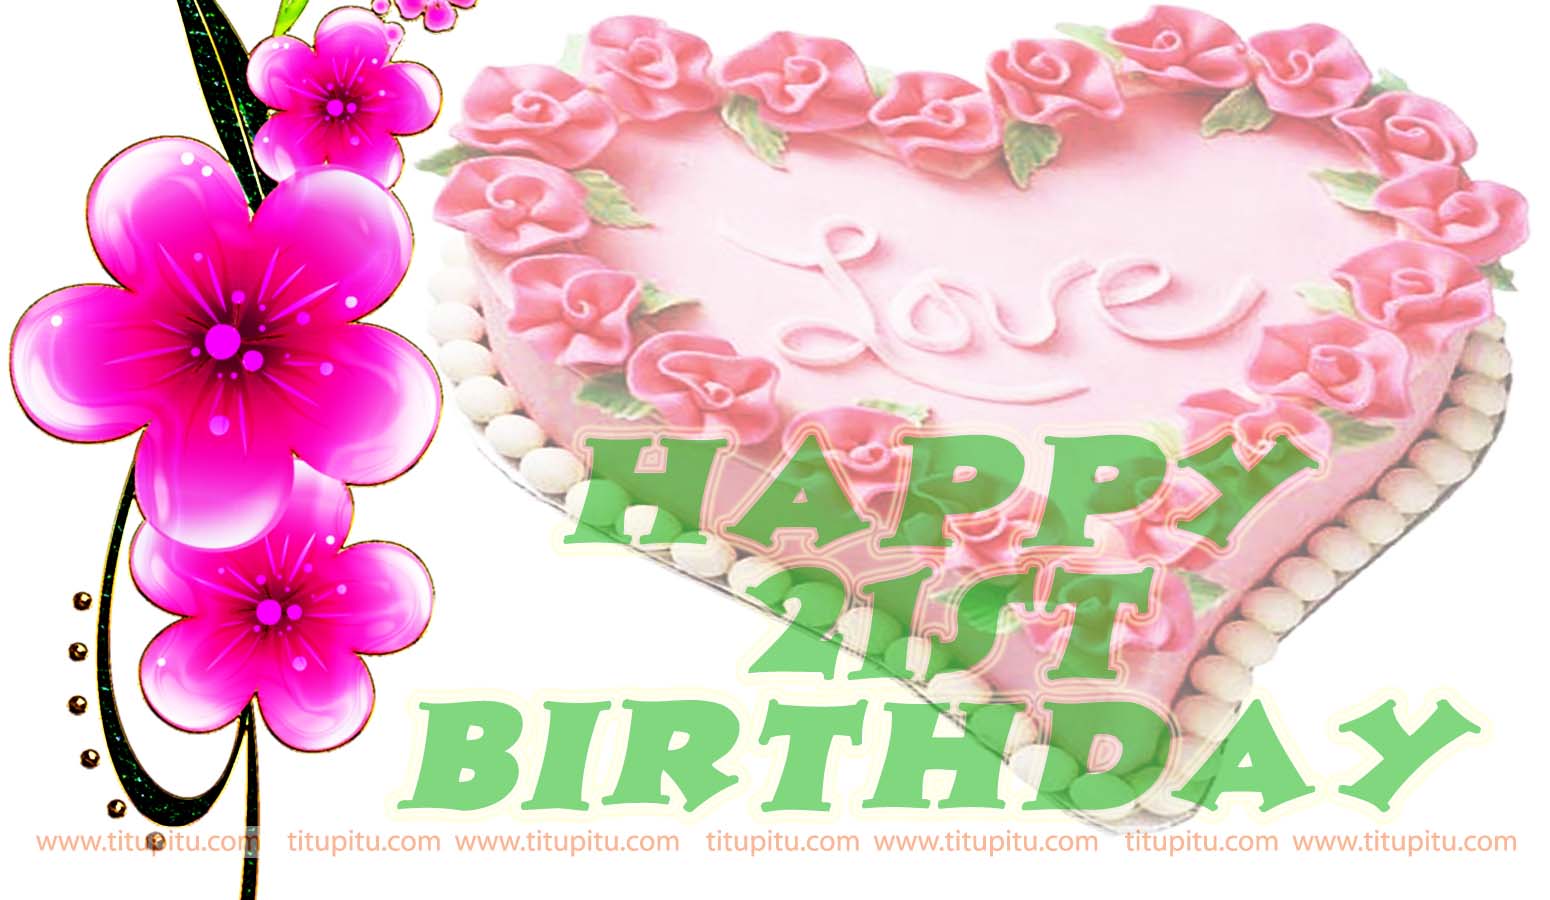 Wallpaper Wishes Messages For 21st Birthday - Birthday , HD Wallpaper & Backgrounds